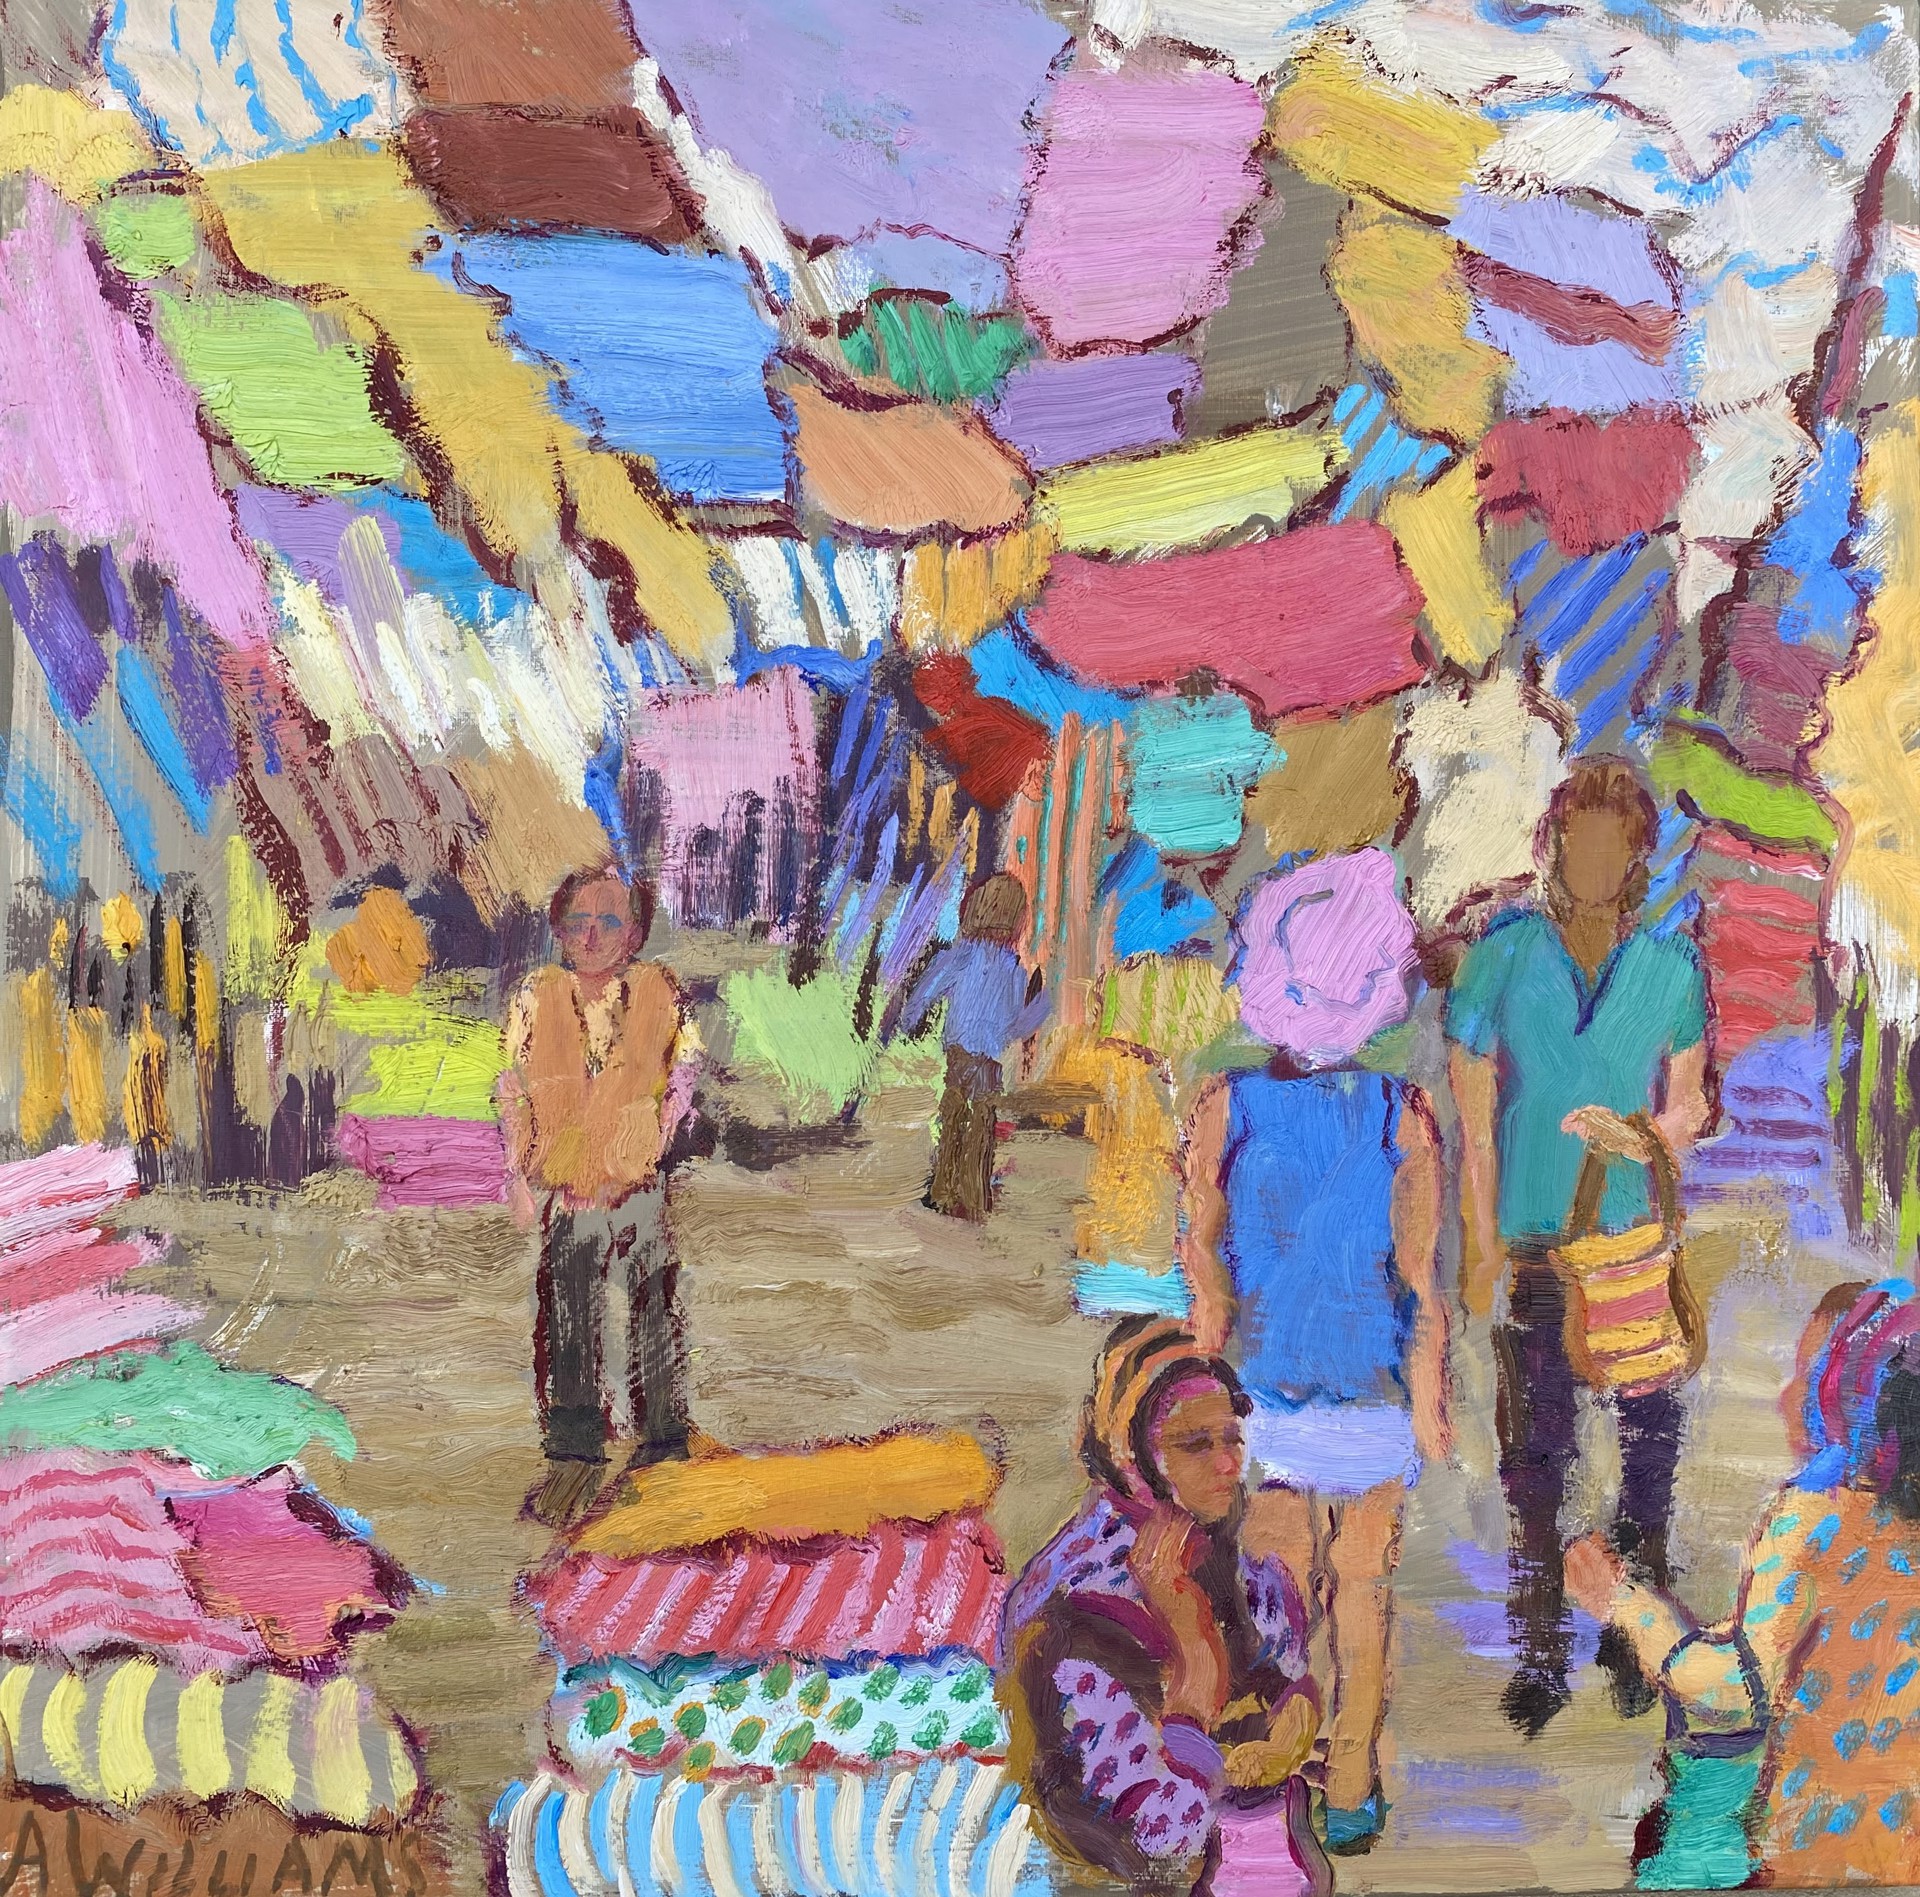 "Bolts of Color - Mauritius Market" Original oil painting by Alice Williams